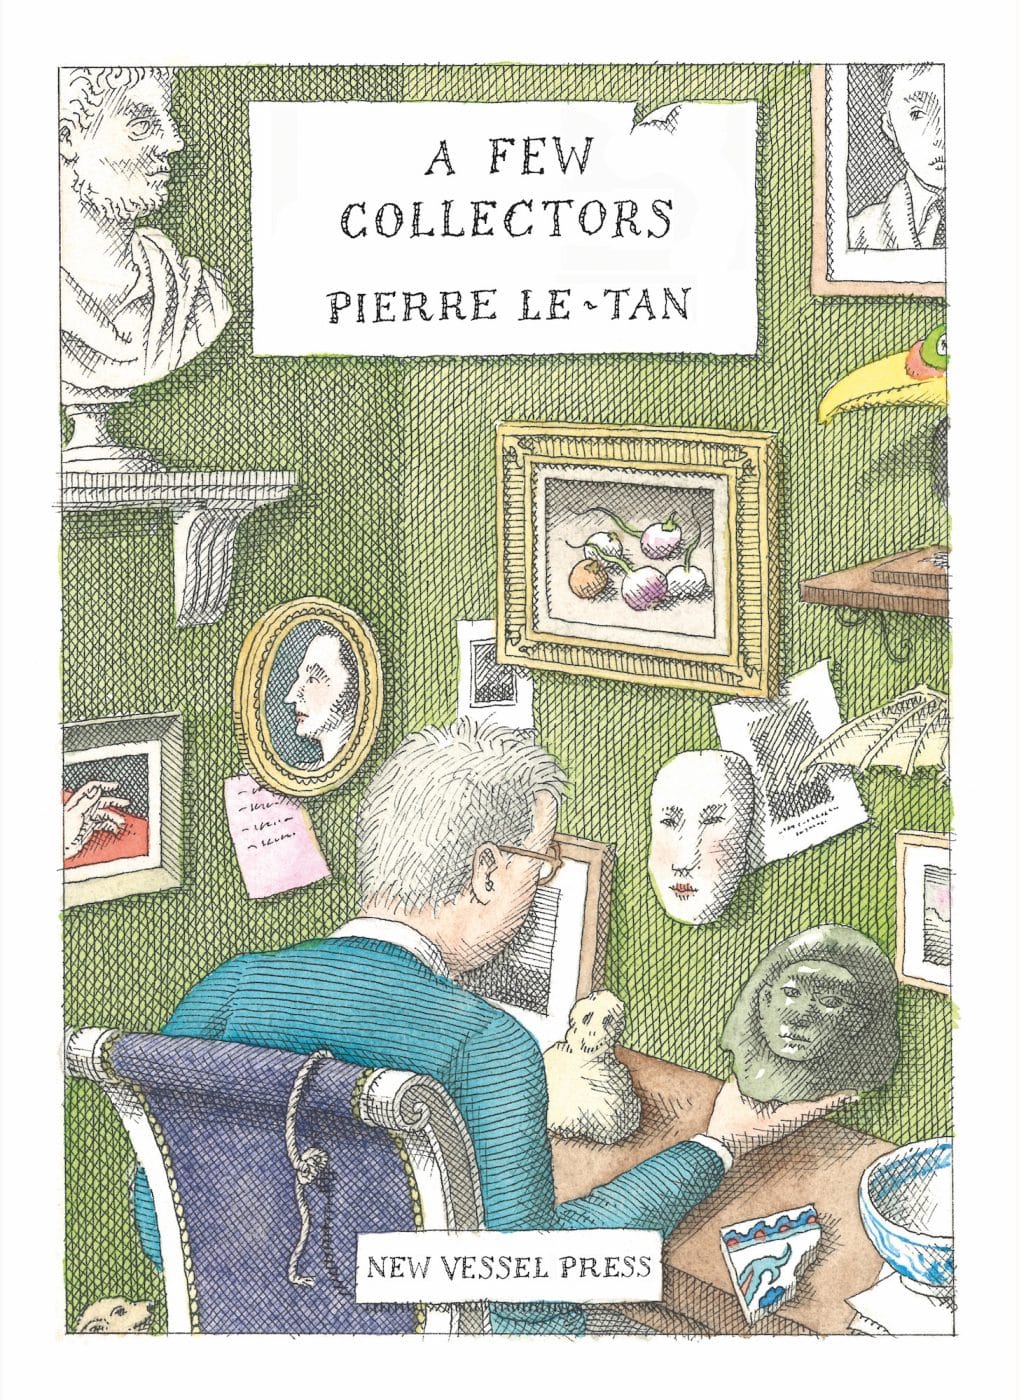 The front cover of A Few Collectors, by Pierre Le-Tan